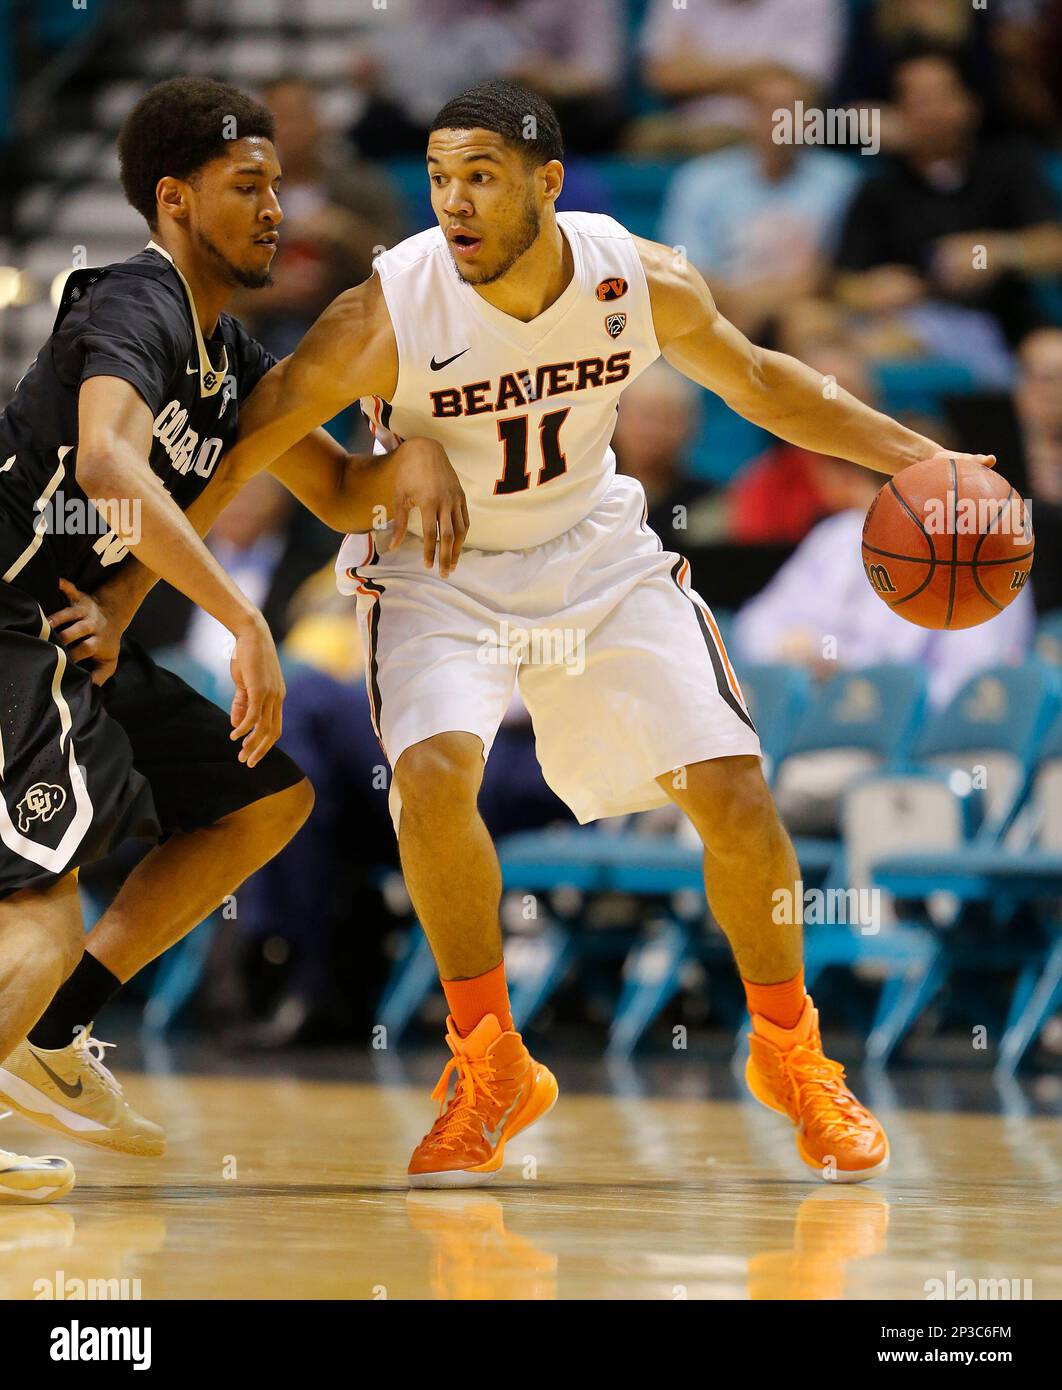 11 March 2015: Oregon State (11) Malcolm Duvivier during the PAC 12 ...